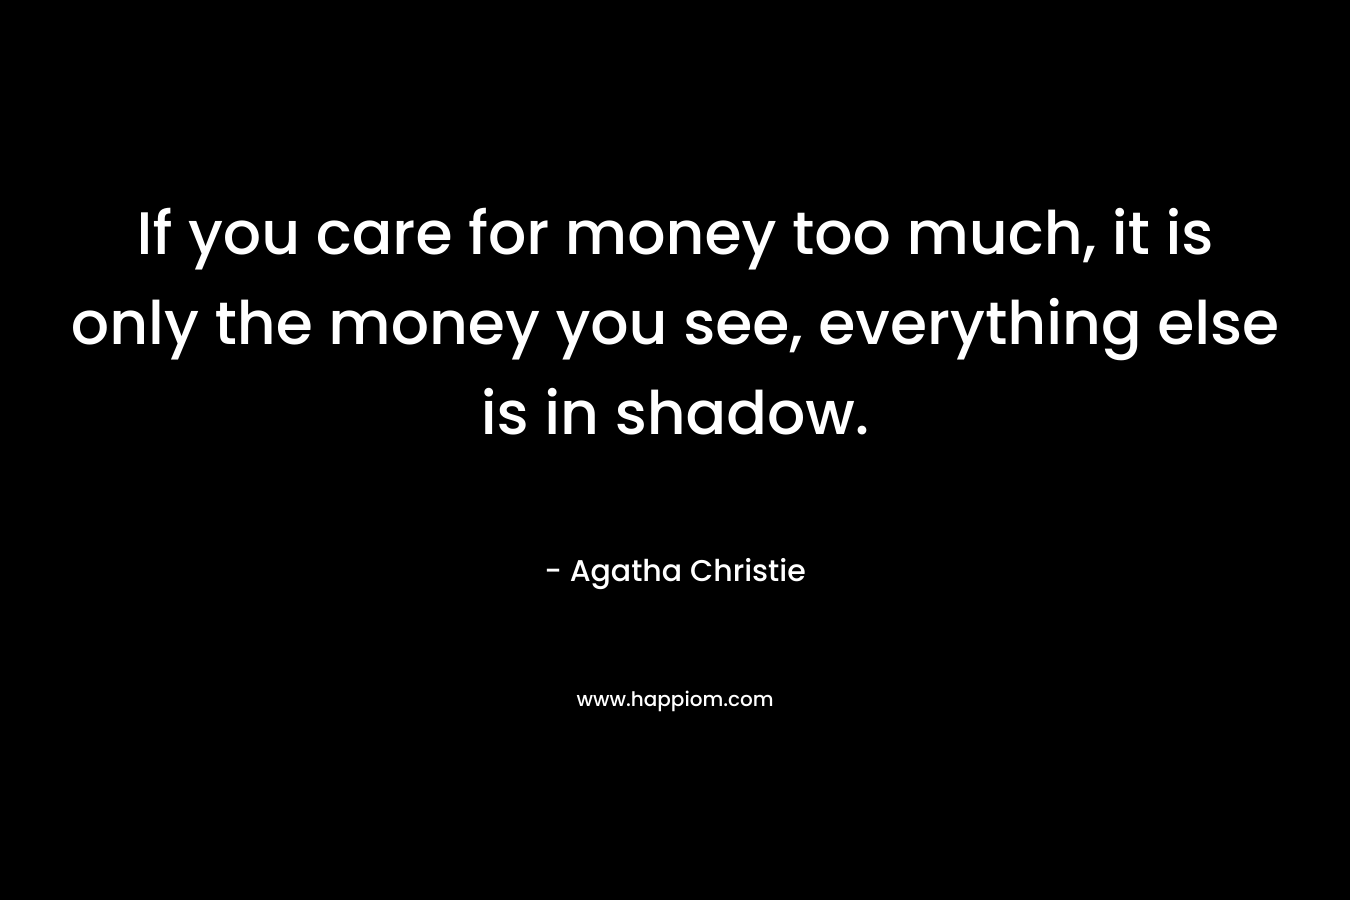 If you care for money too much, it is only the money you see, everything else is in shadow.